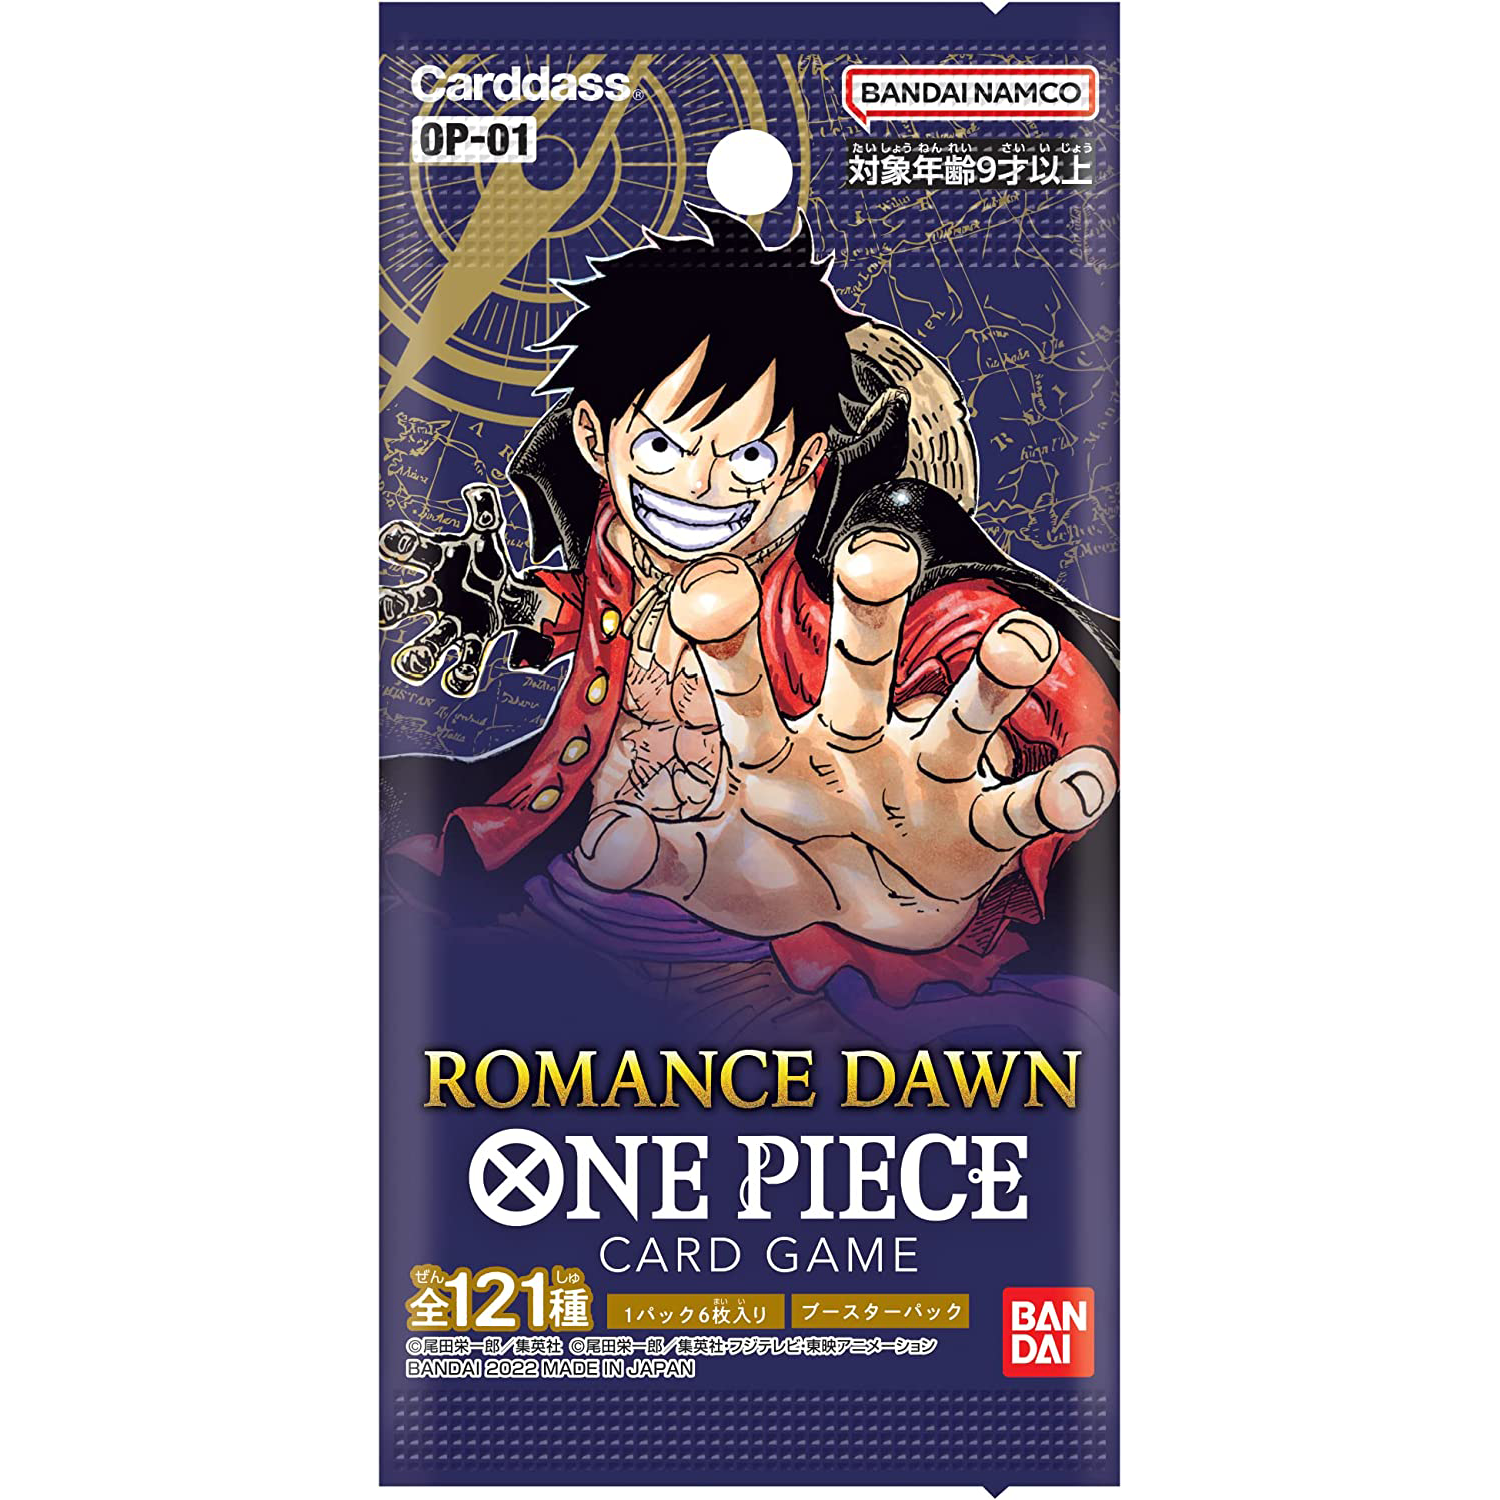 OP-01] ONE PIECE CARD GAME Booster Pack ｢ROMANCE DAWN｣ Box